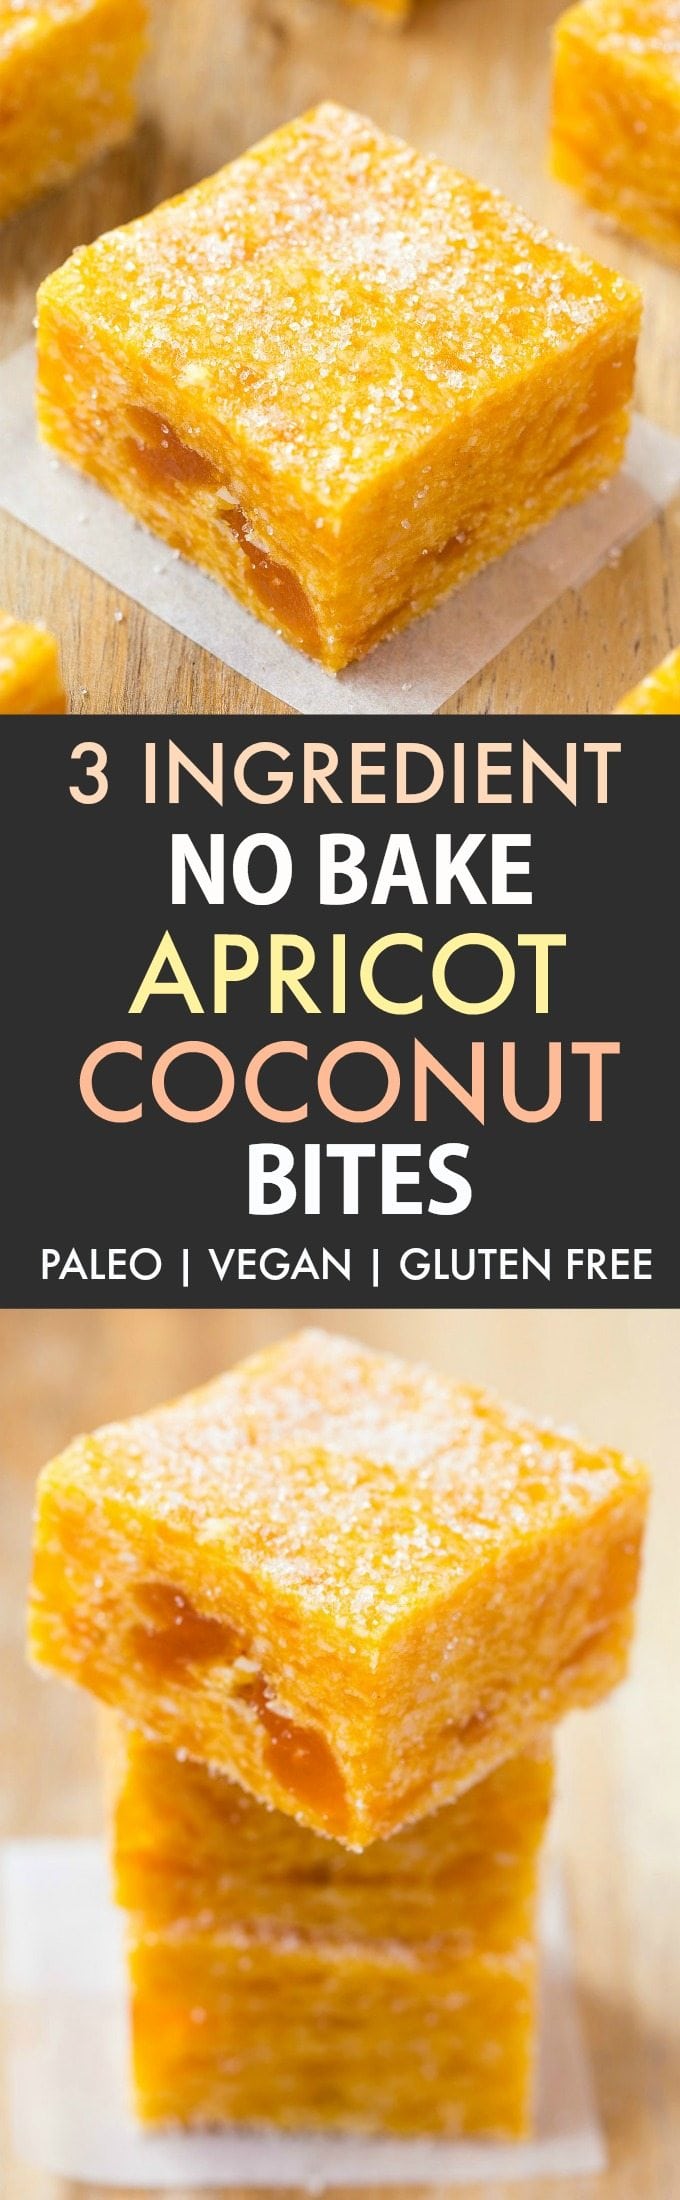 3 Ingredient No Bake Apricot Coconut Bites (Paleo, Vegan, Gluten Free) - Quick and easy apricot coconut energy bite recipe made with 3 ingredients and no sugar! {v, gf, p, df}- thebigmansworld.com